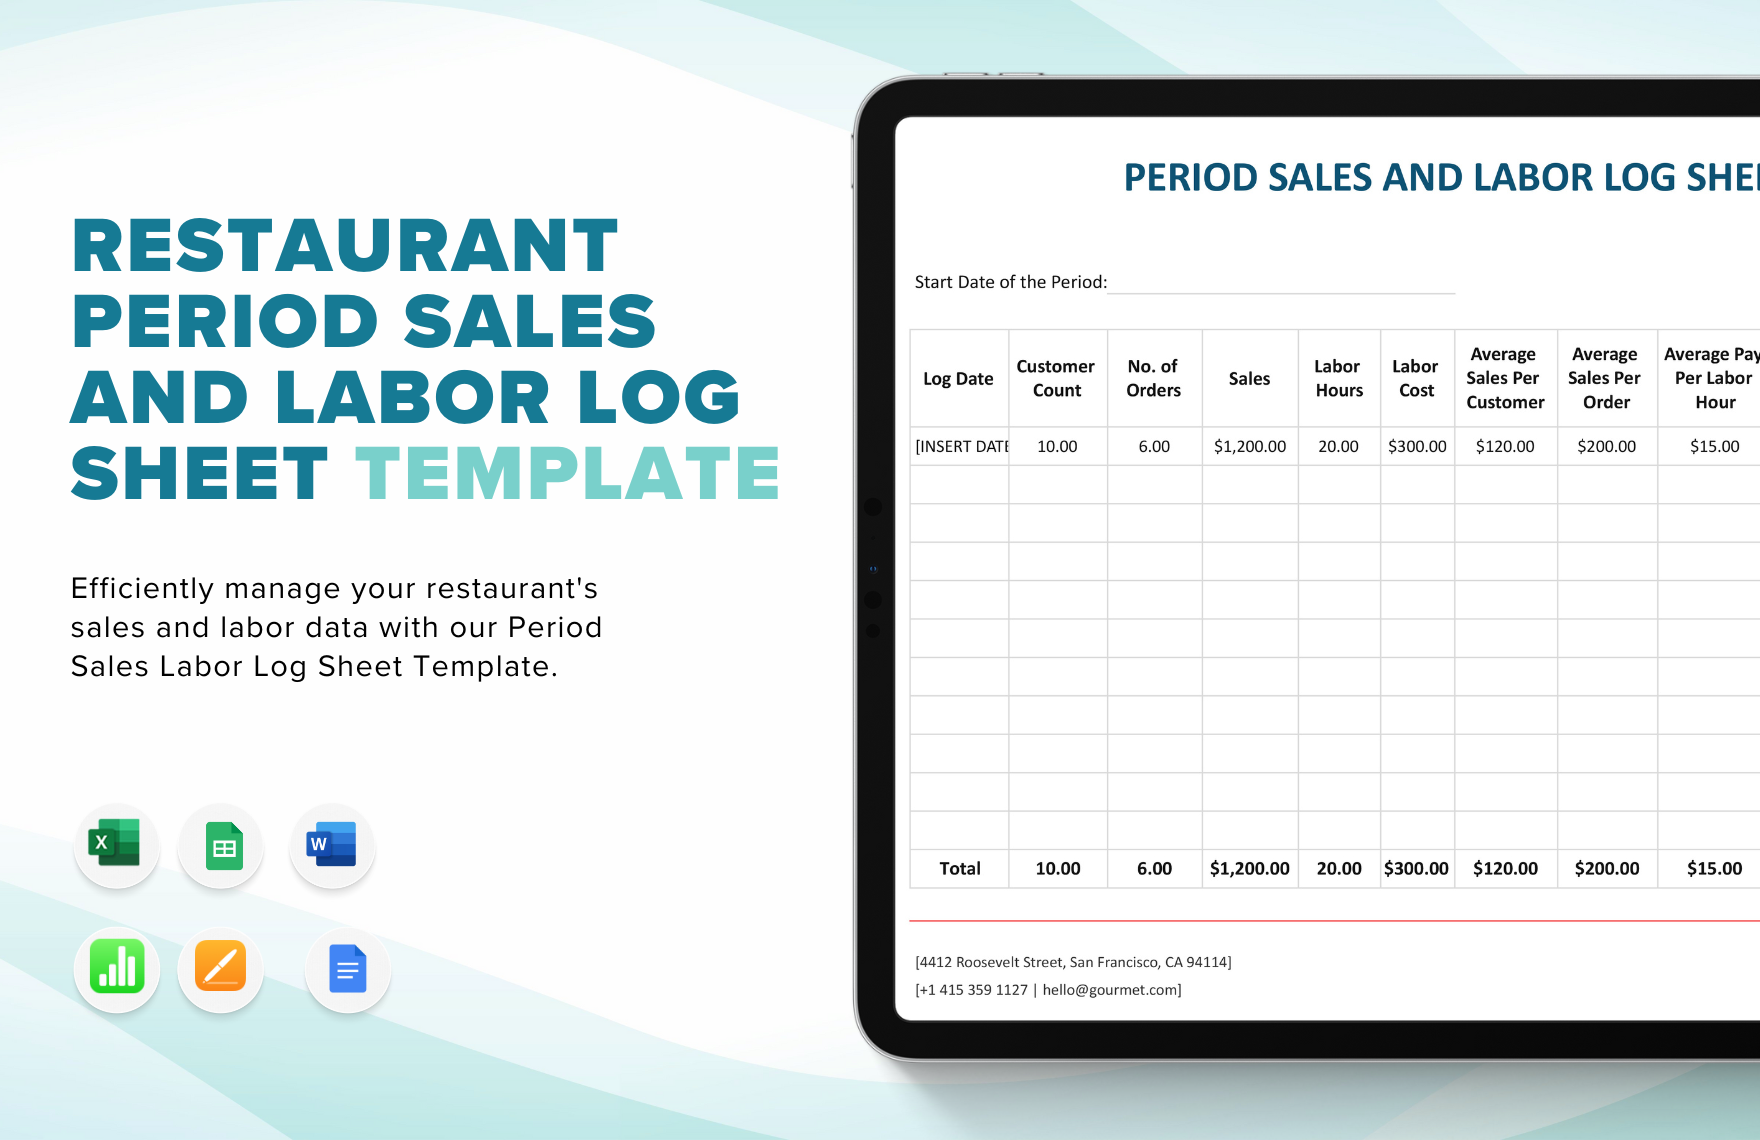 Restaurant Period Sales and Labor Log Sheet Template in Word, Google Docs, Excel, Google Sheets, Apple Pages, Apple Numbers